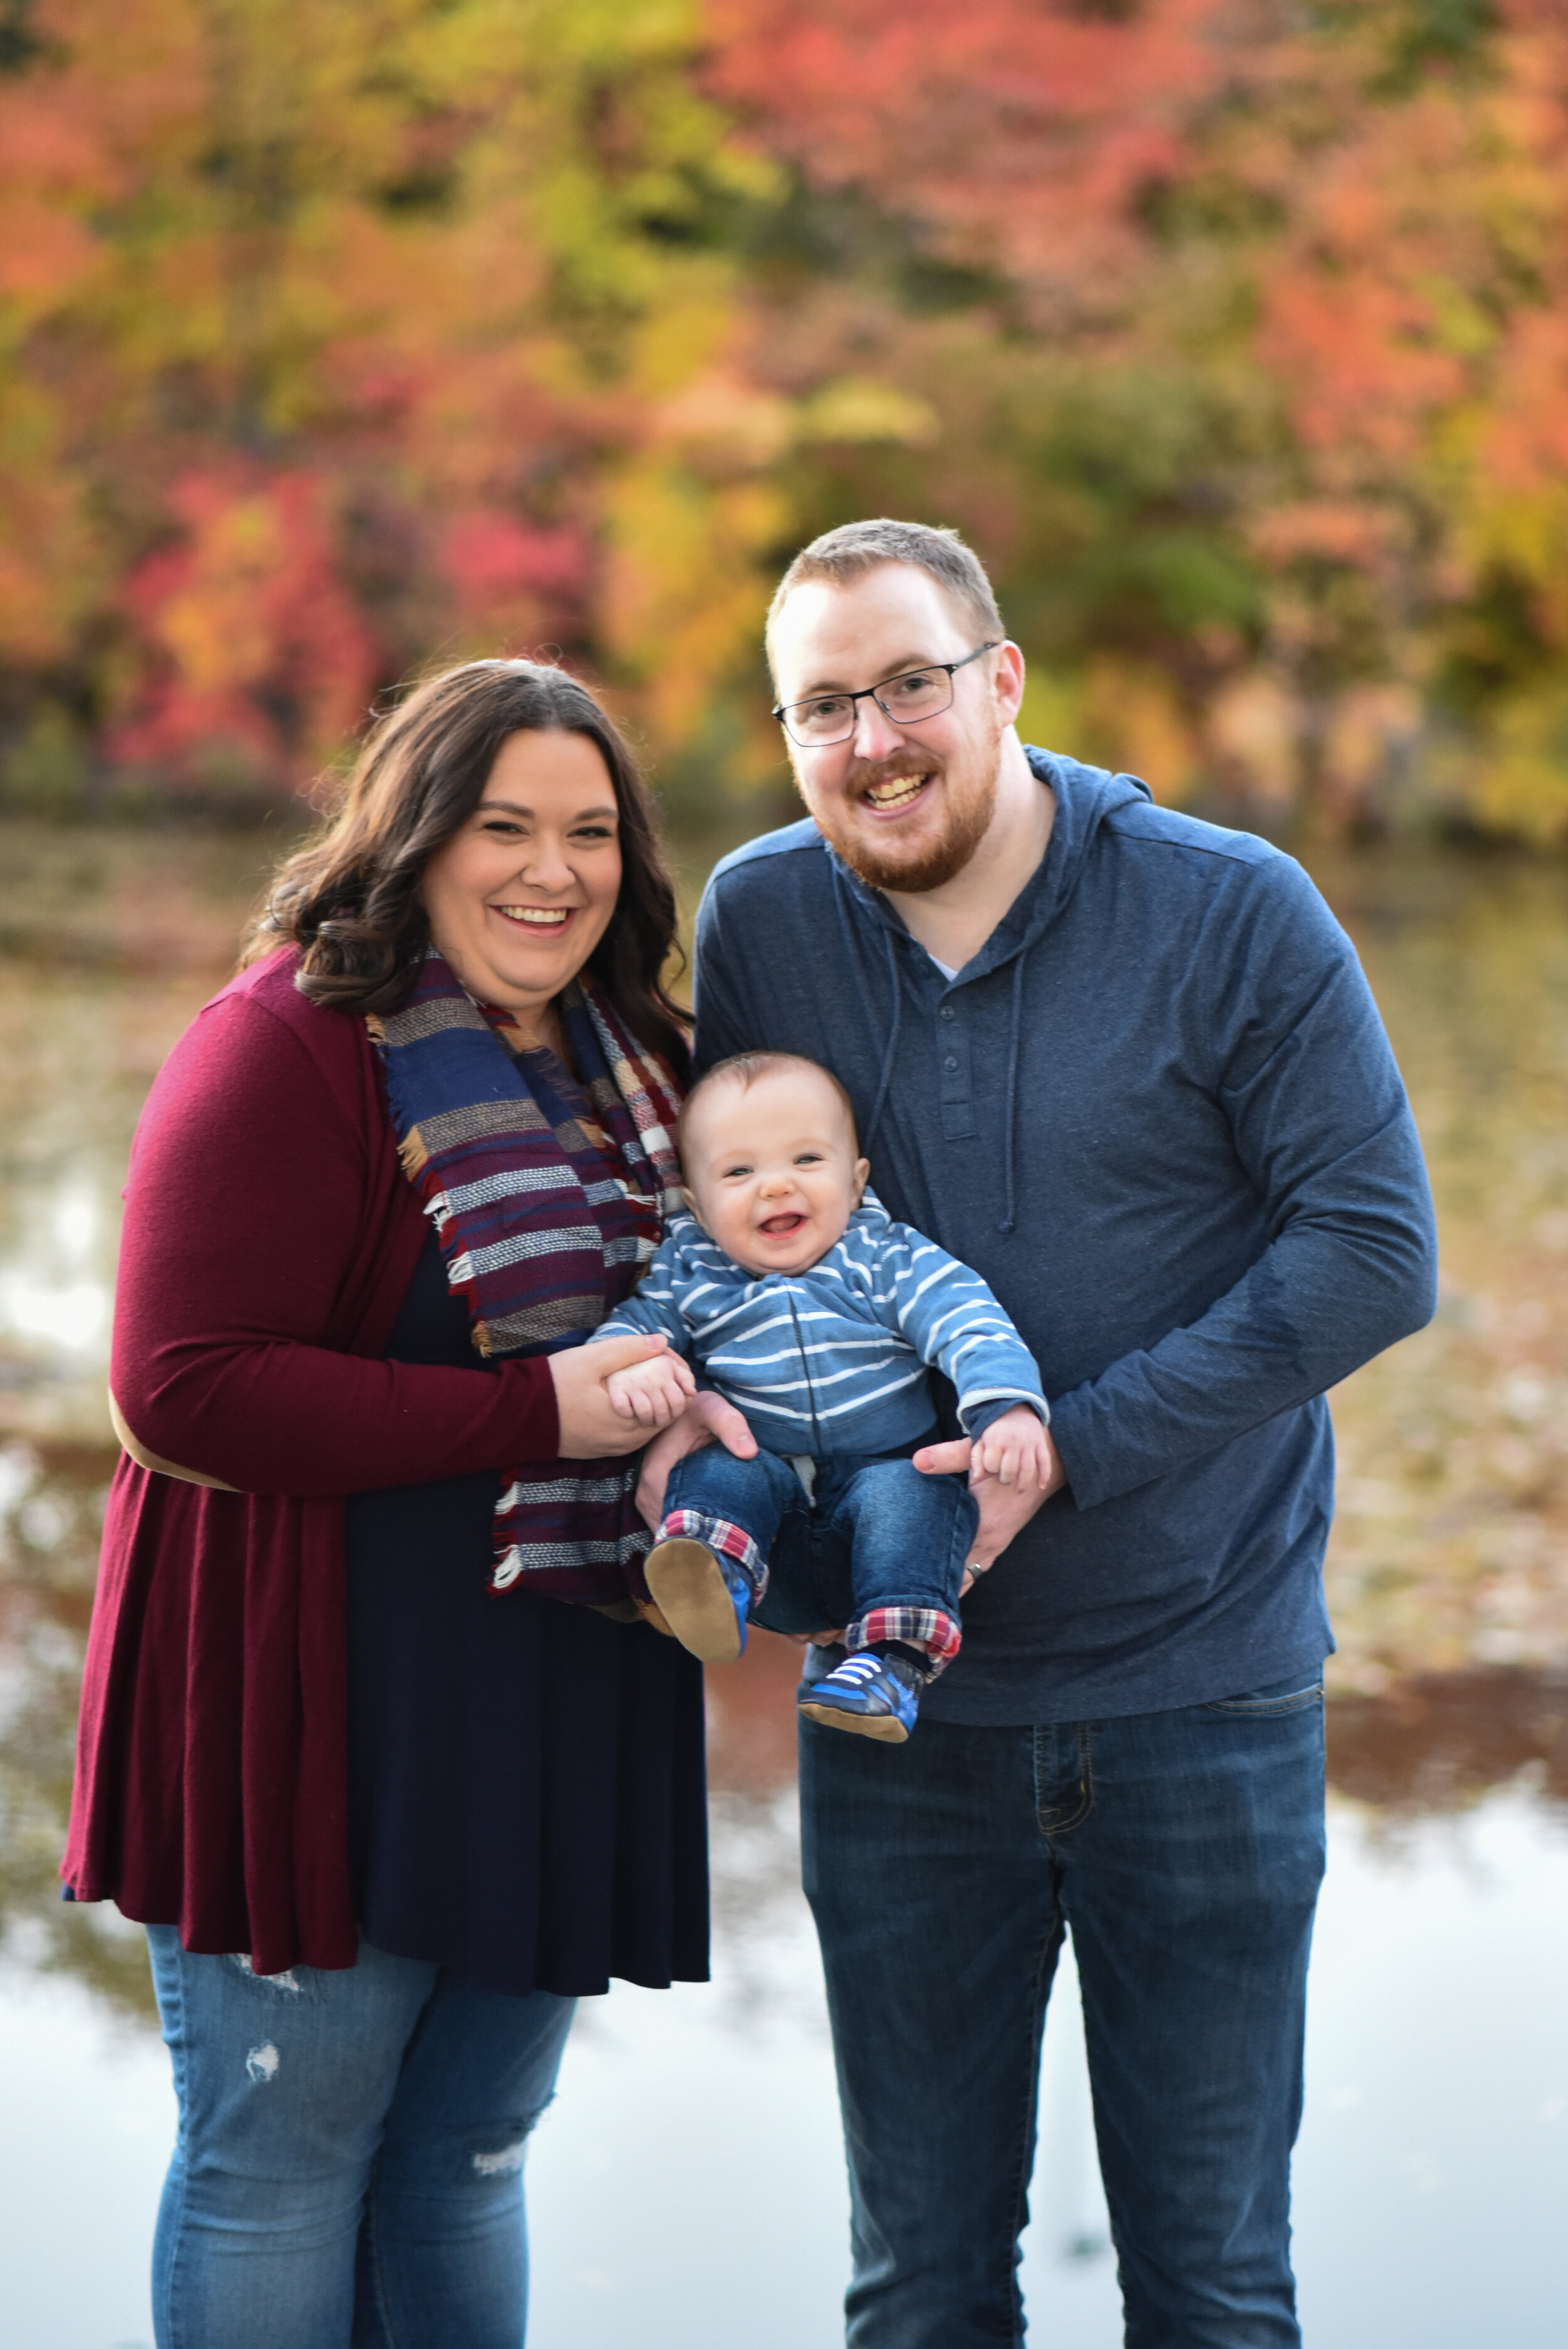 013_Erika Cassidy_Andy Oliver_Family Fall 2018.jpg